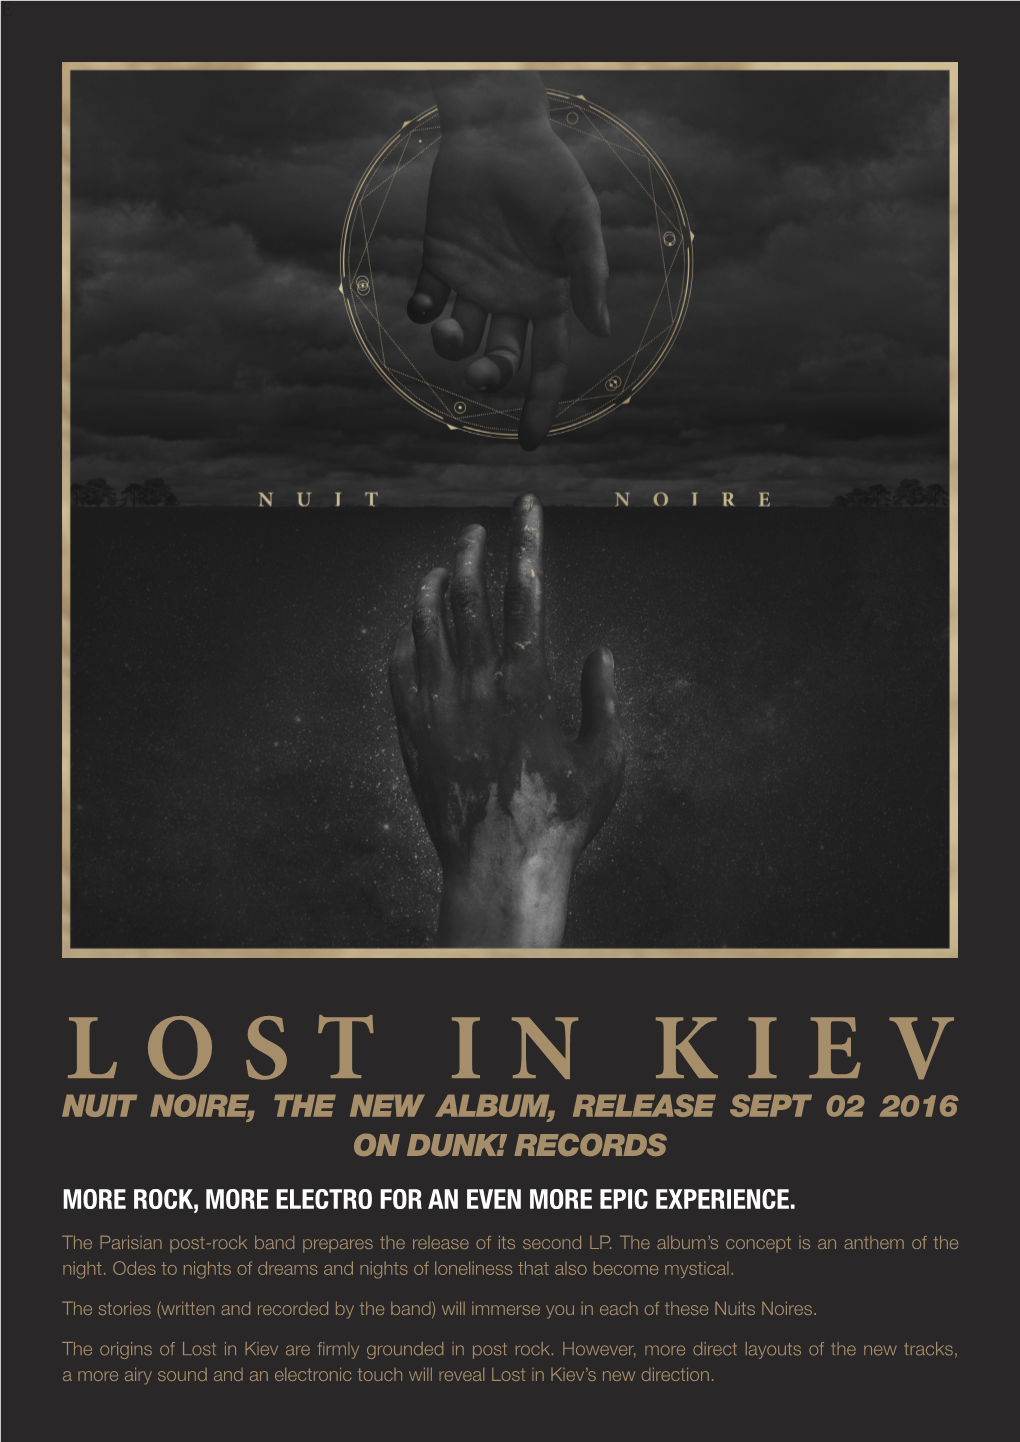 Lost in Kiev Are Firmly Grounded in Post Rock